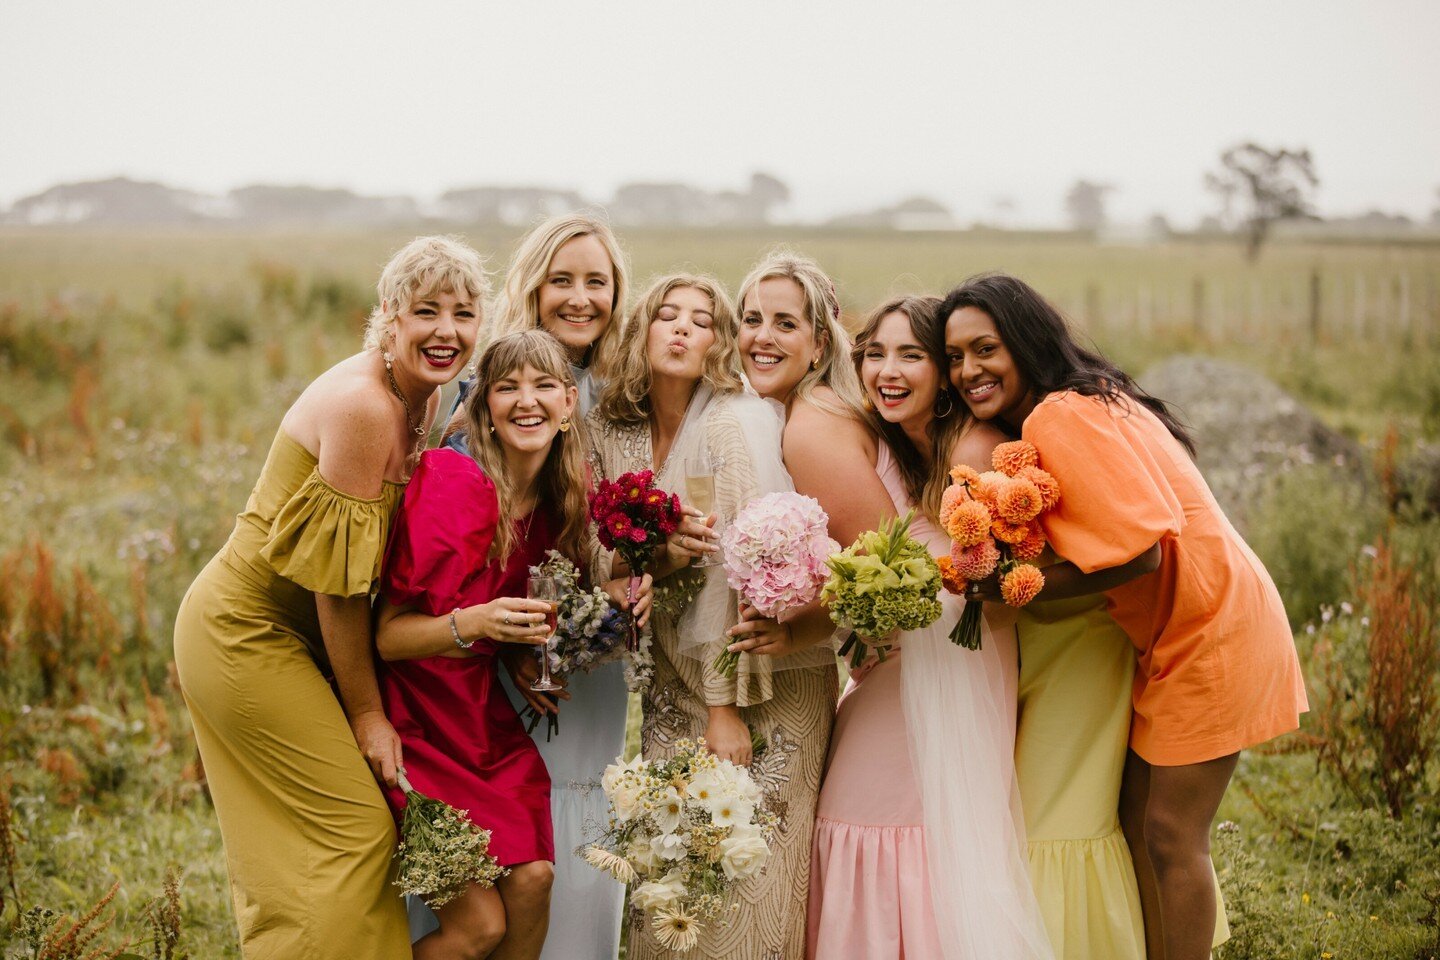 The one time I've actually wanted to join the Bridesmaids crew! These girls were the best! 

@aimeekellyphotography